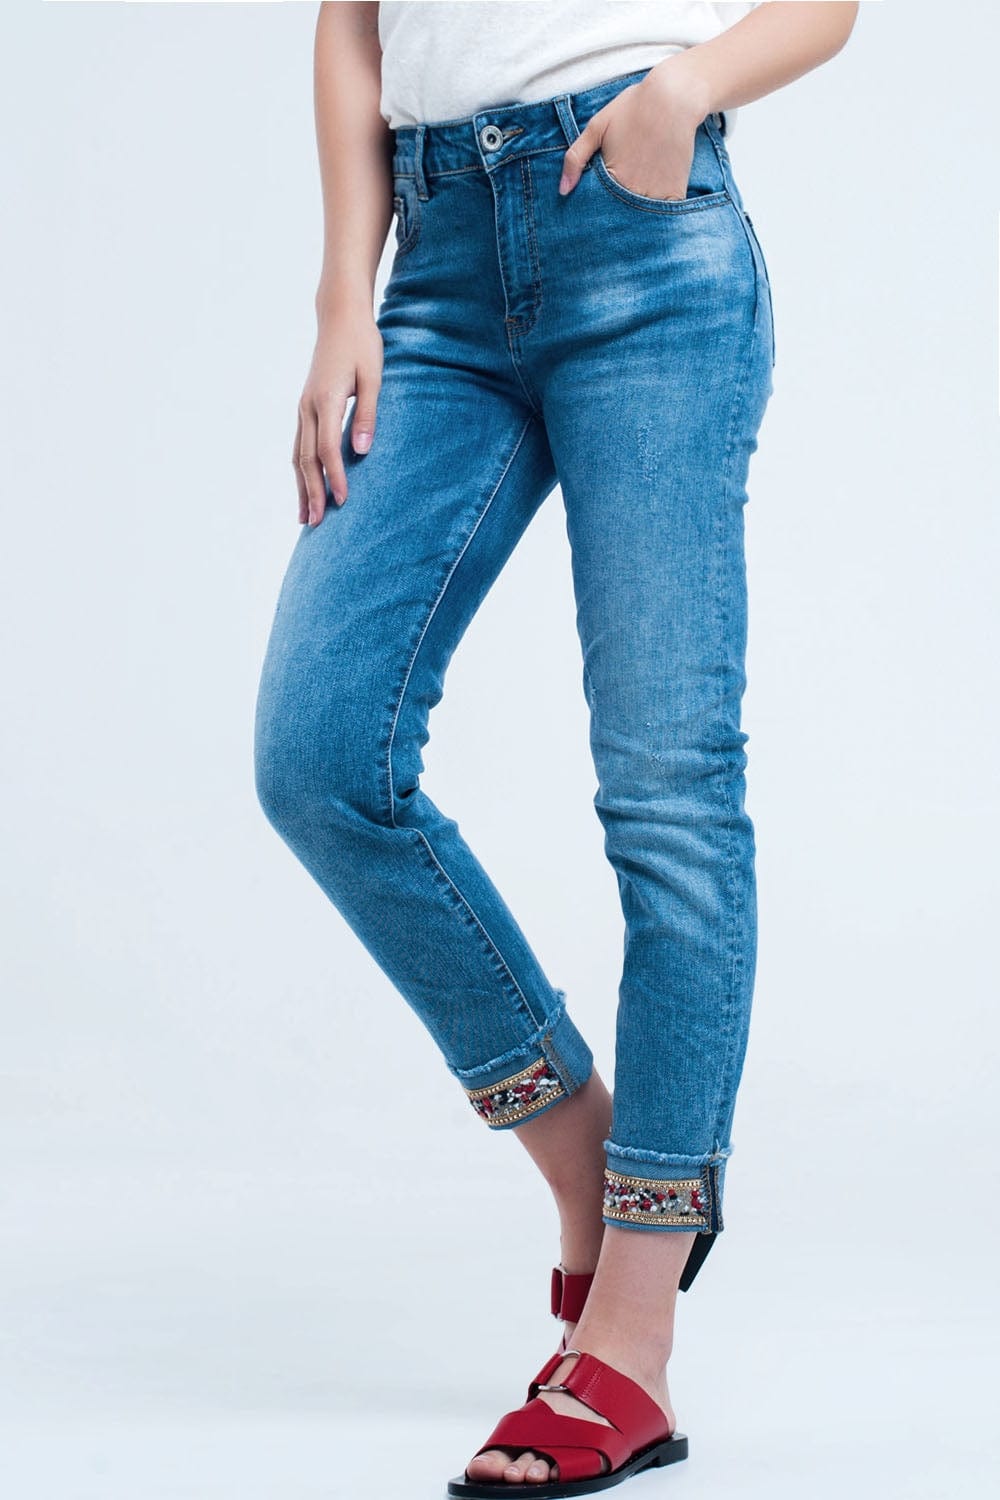 Q2 Women's Jean Straight ankle jeans with crystal detail